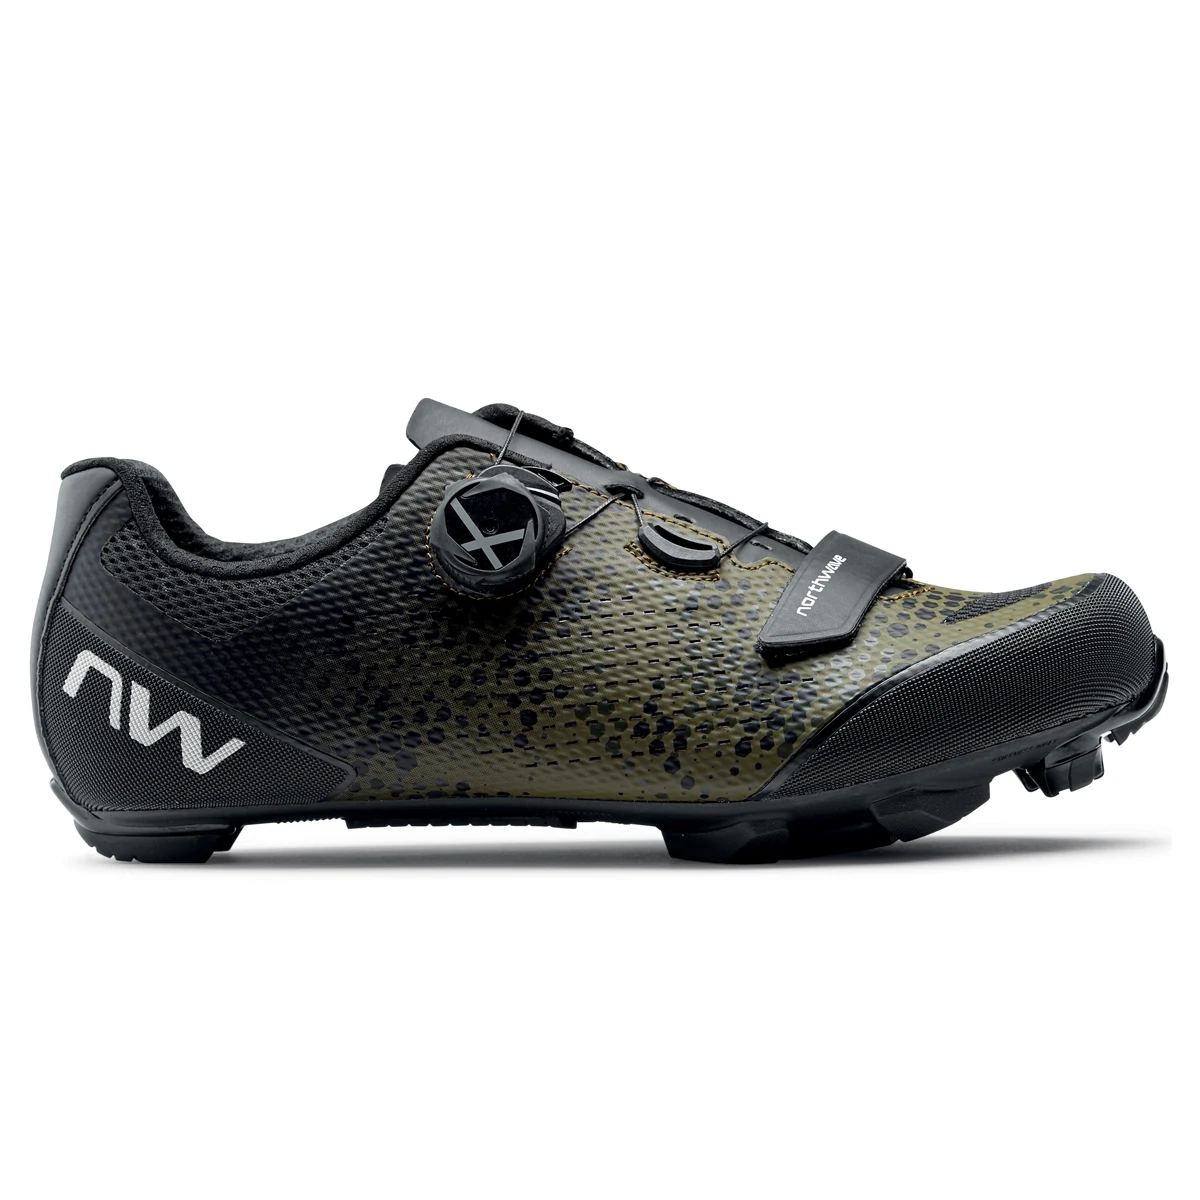 NORTHWAVE 2 MTB CYCLING SHOES – Studio